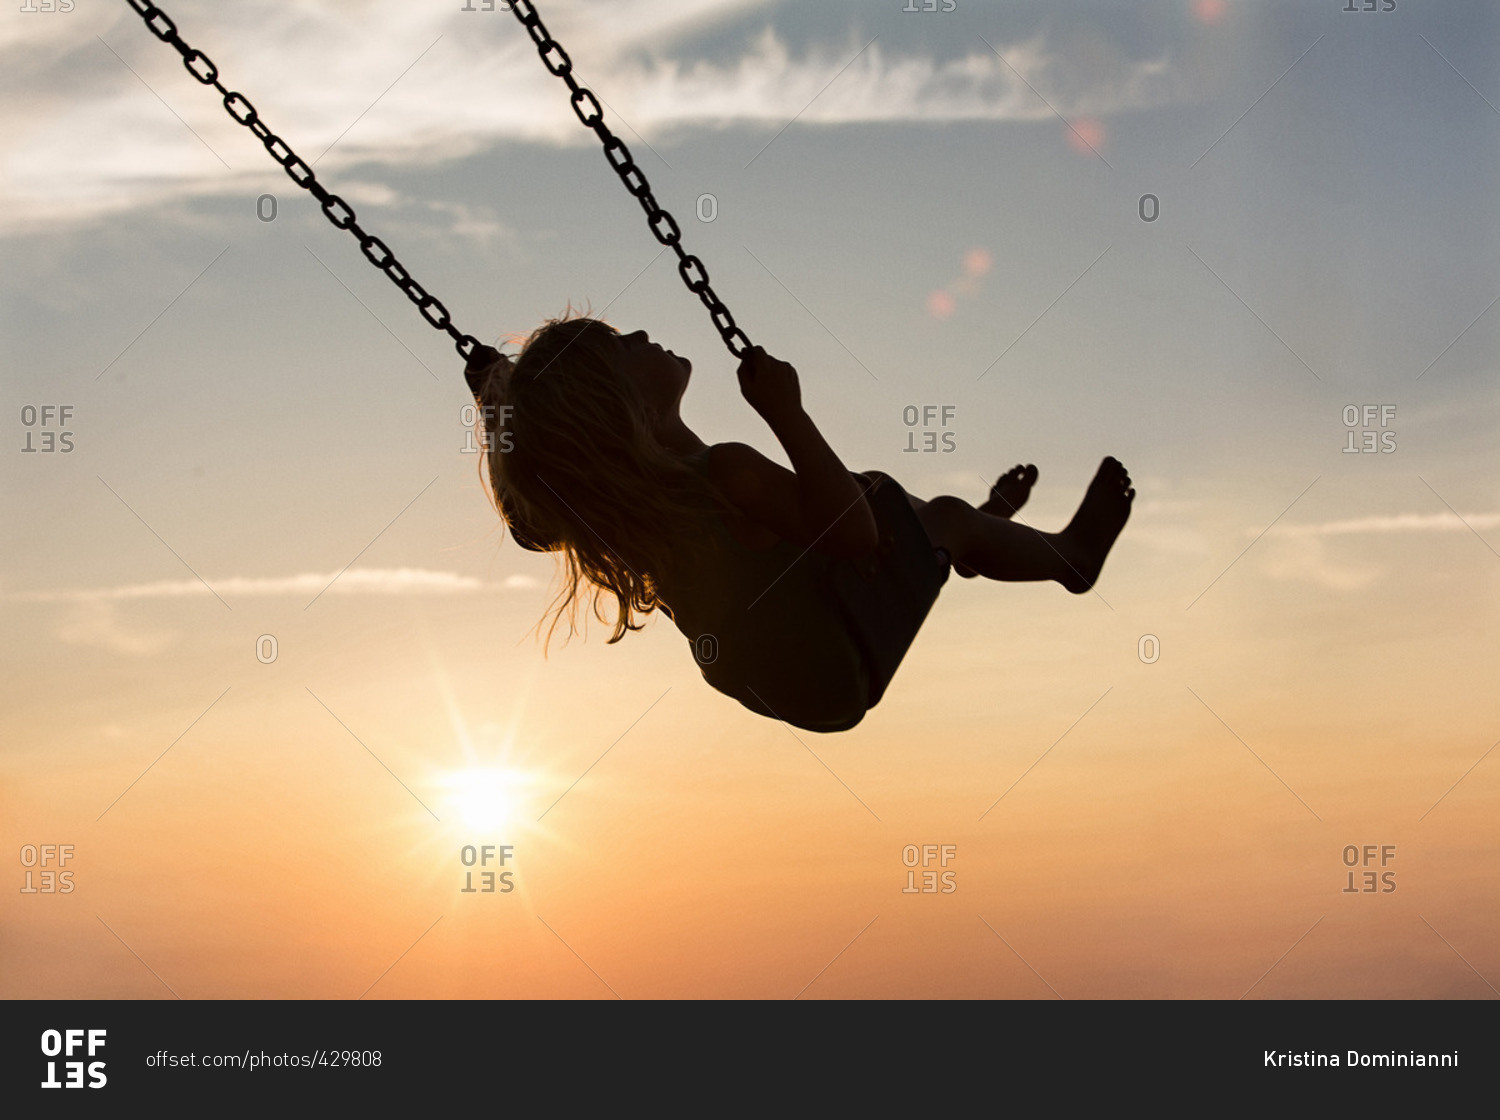 Little girl swinging on a swing at sunset